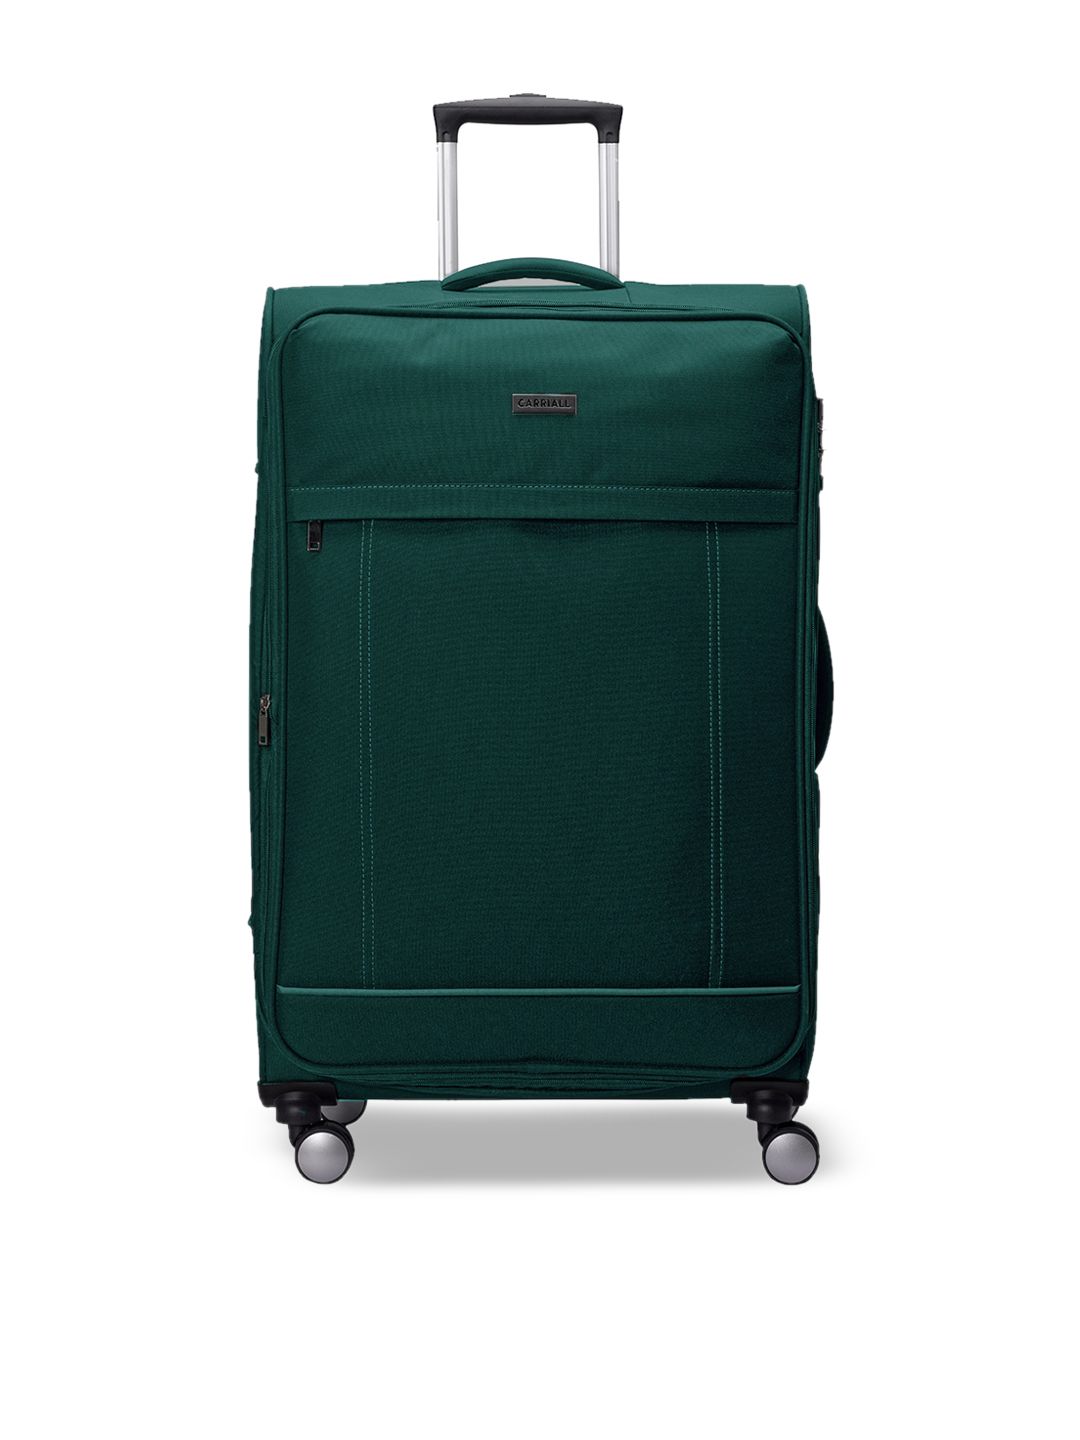 CARRIALL Green Solid Soft-Sided Medium Trolley Suitcase Price in India